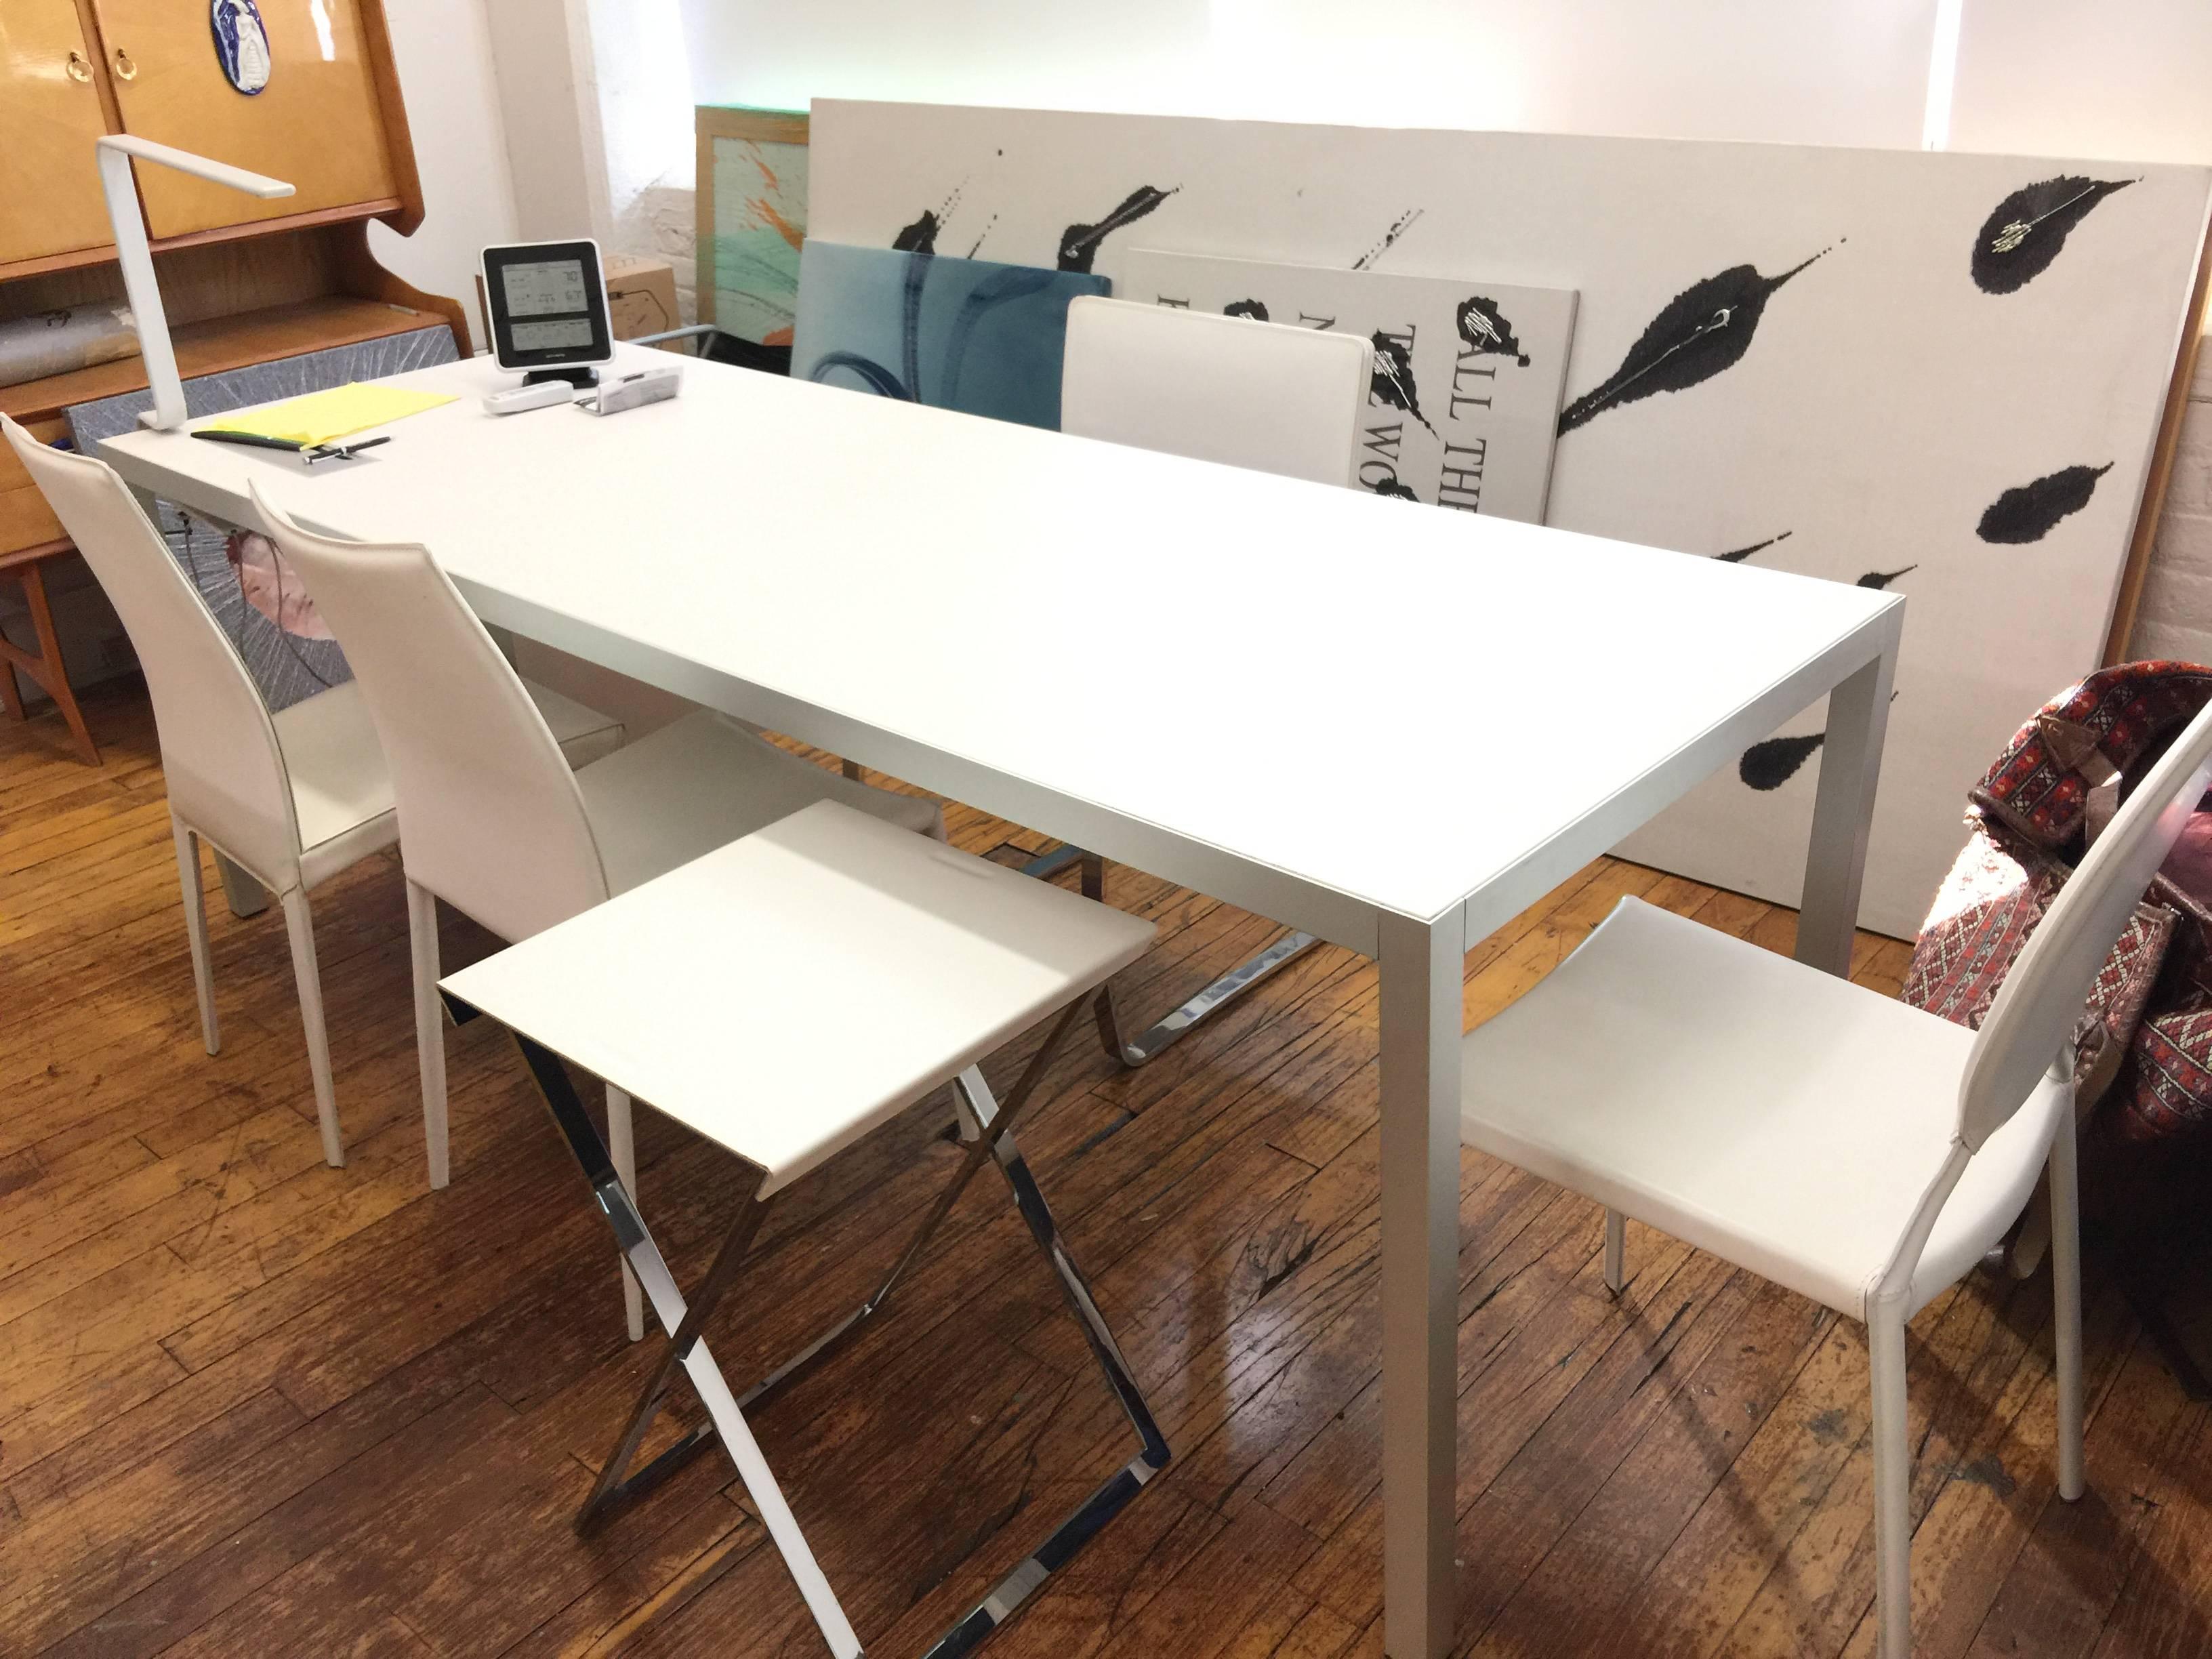 Modern Office Set Desk  with chair and side table all Italian production, from our showroom display use 

One large MDF ITALIA model Keramik 2006 desk table with drawers 
One chrome and white leather chair 
One chrome and white leather side